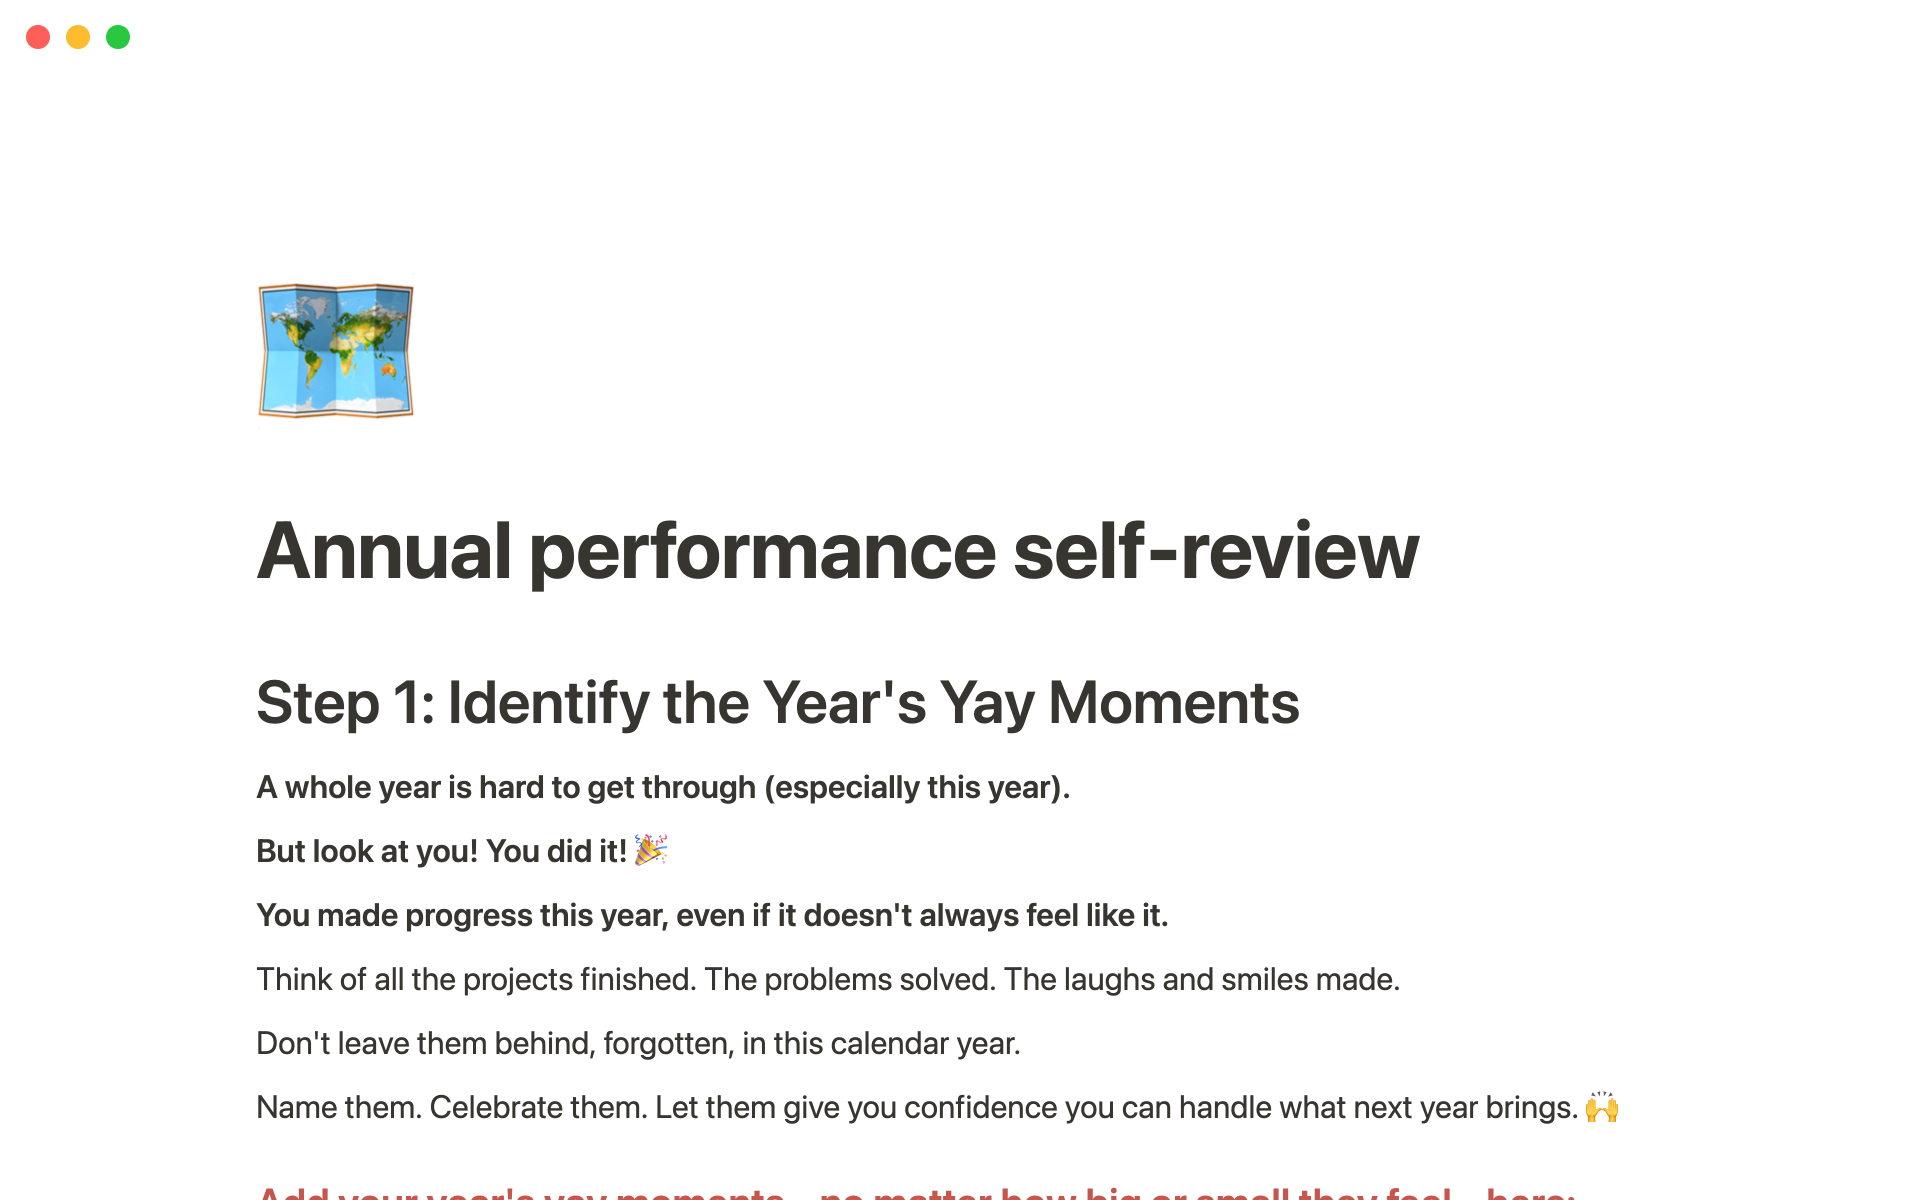 Annual performance self-review template